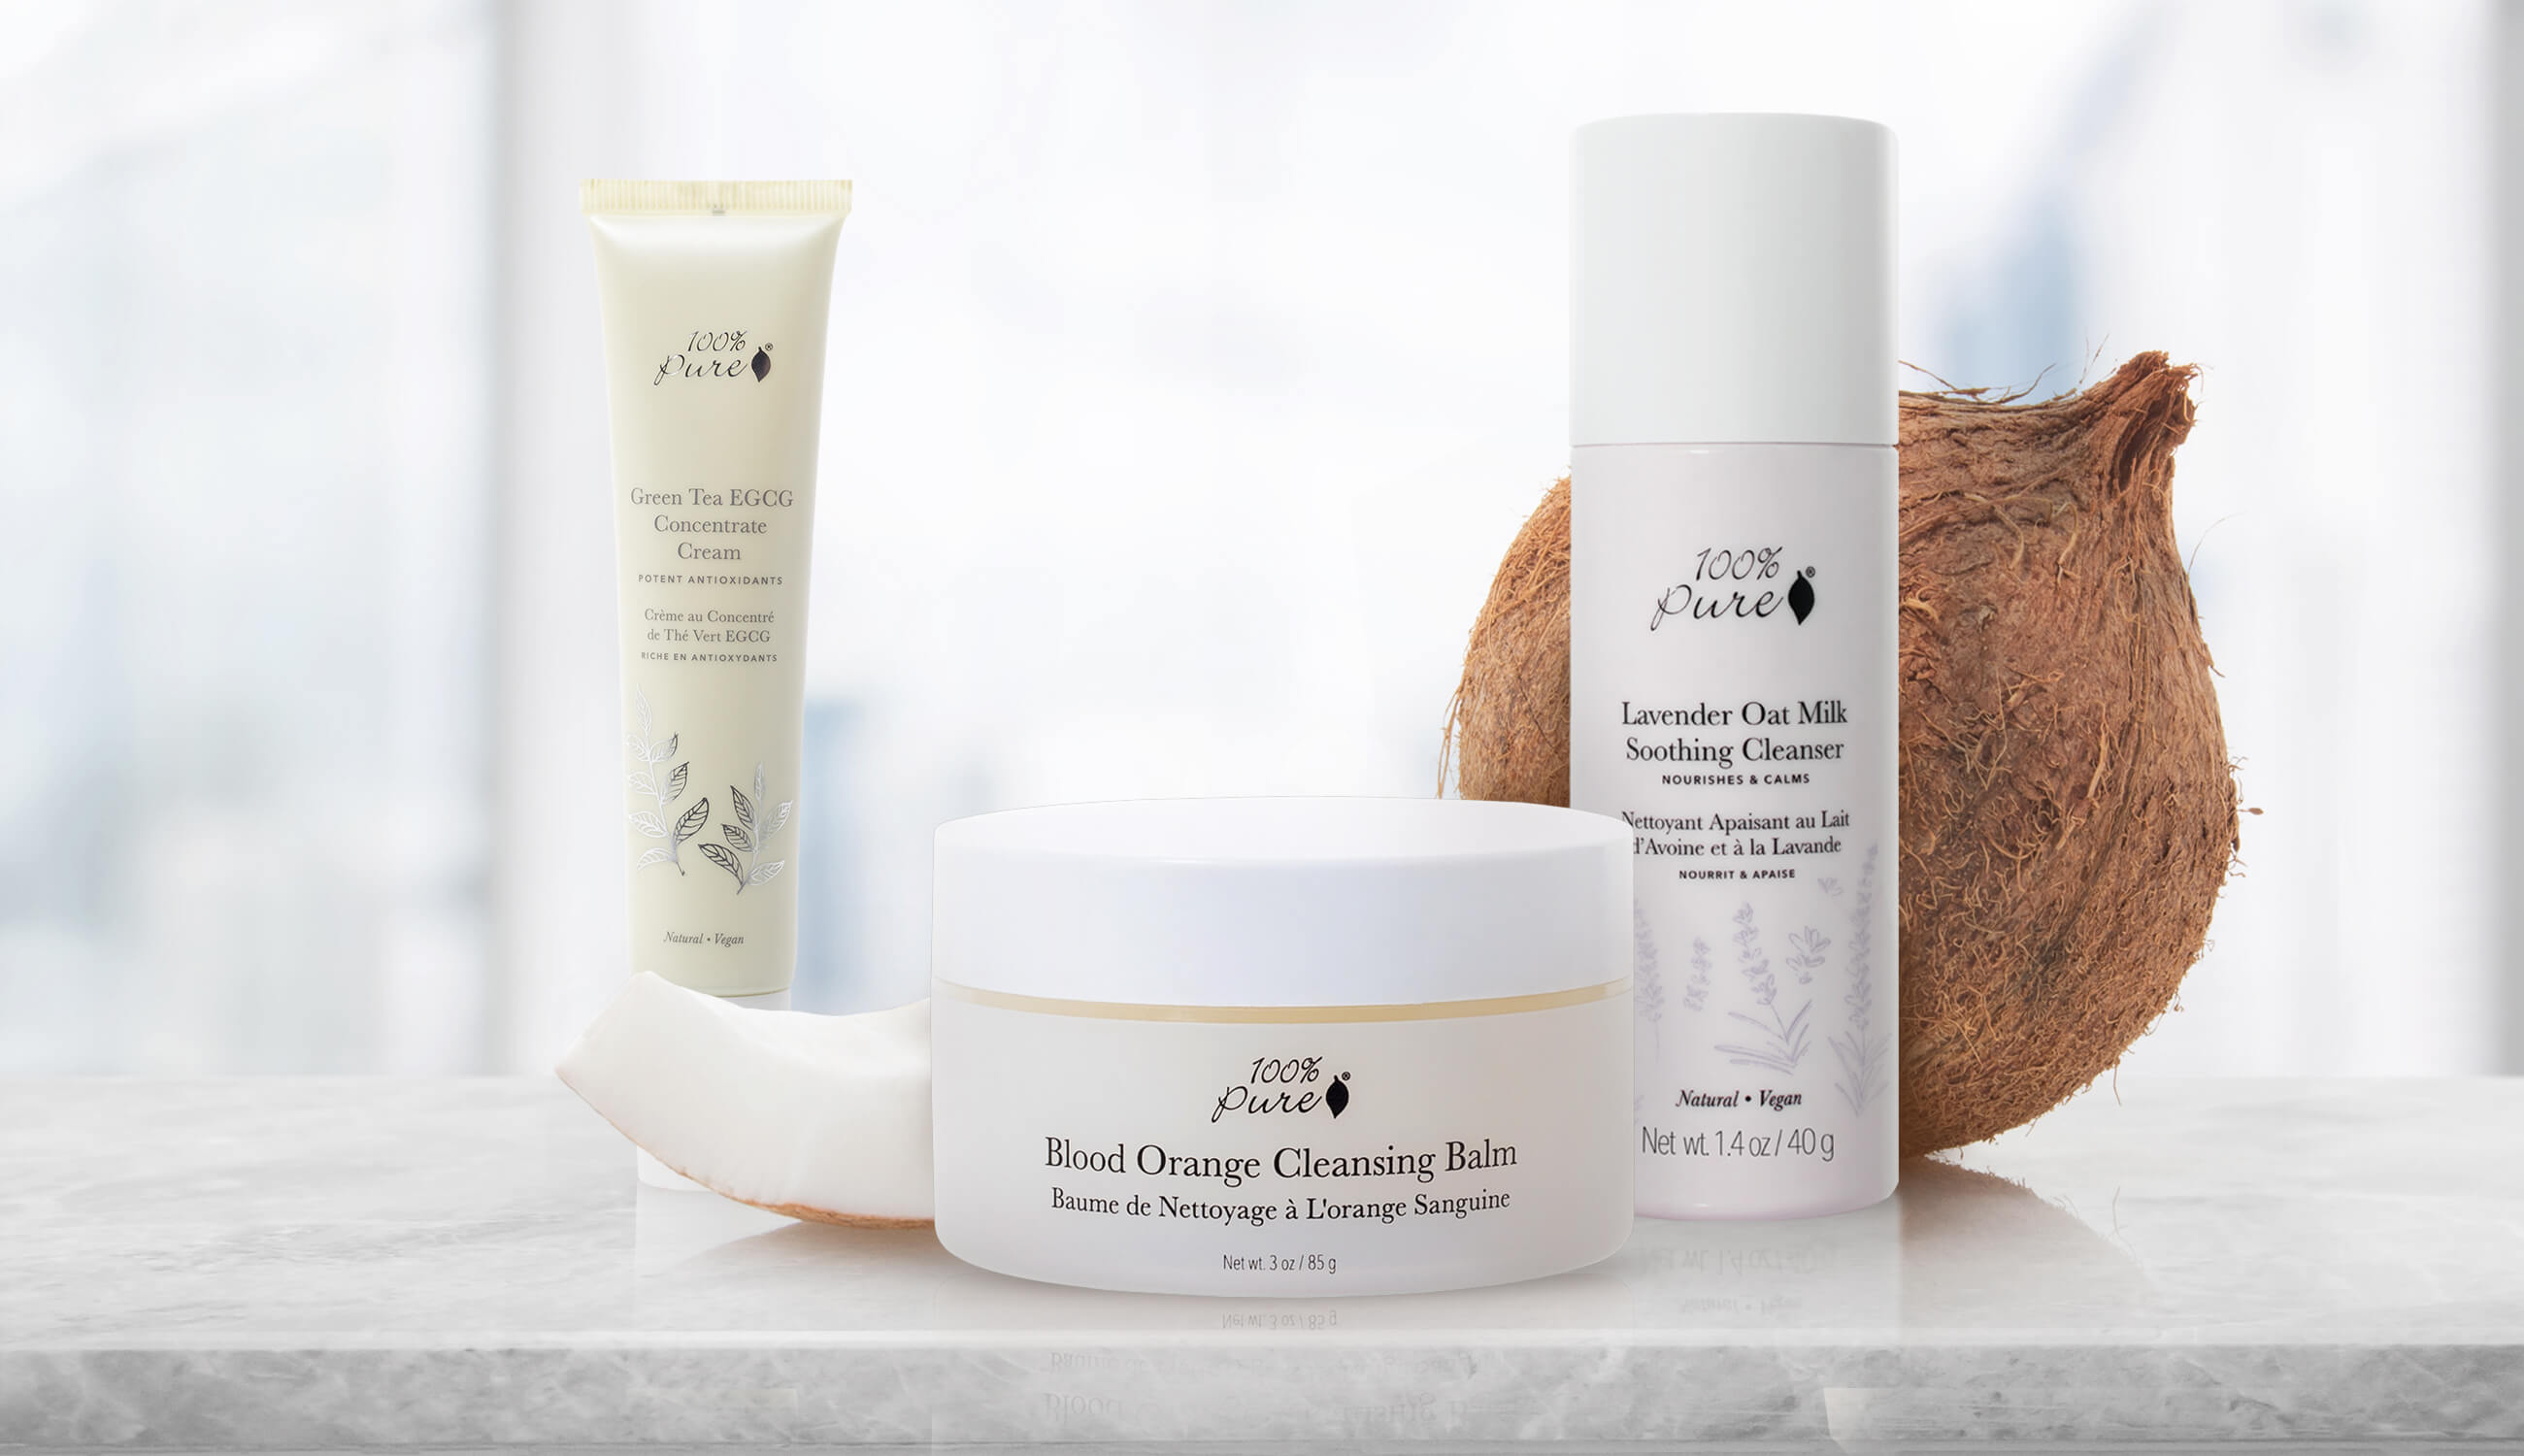 Products with coconuts